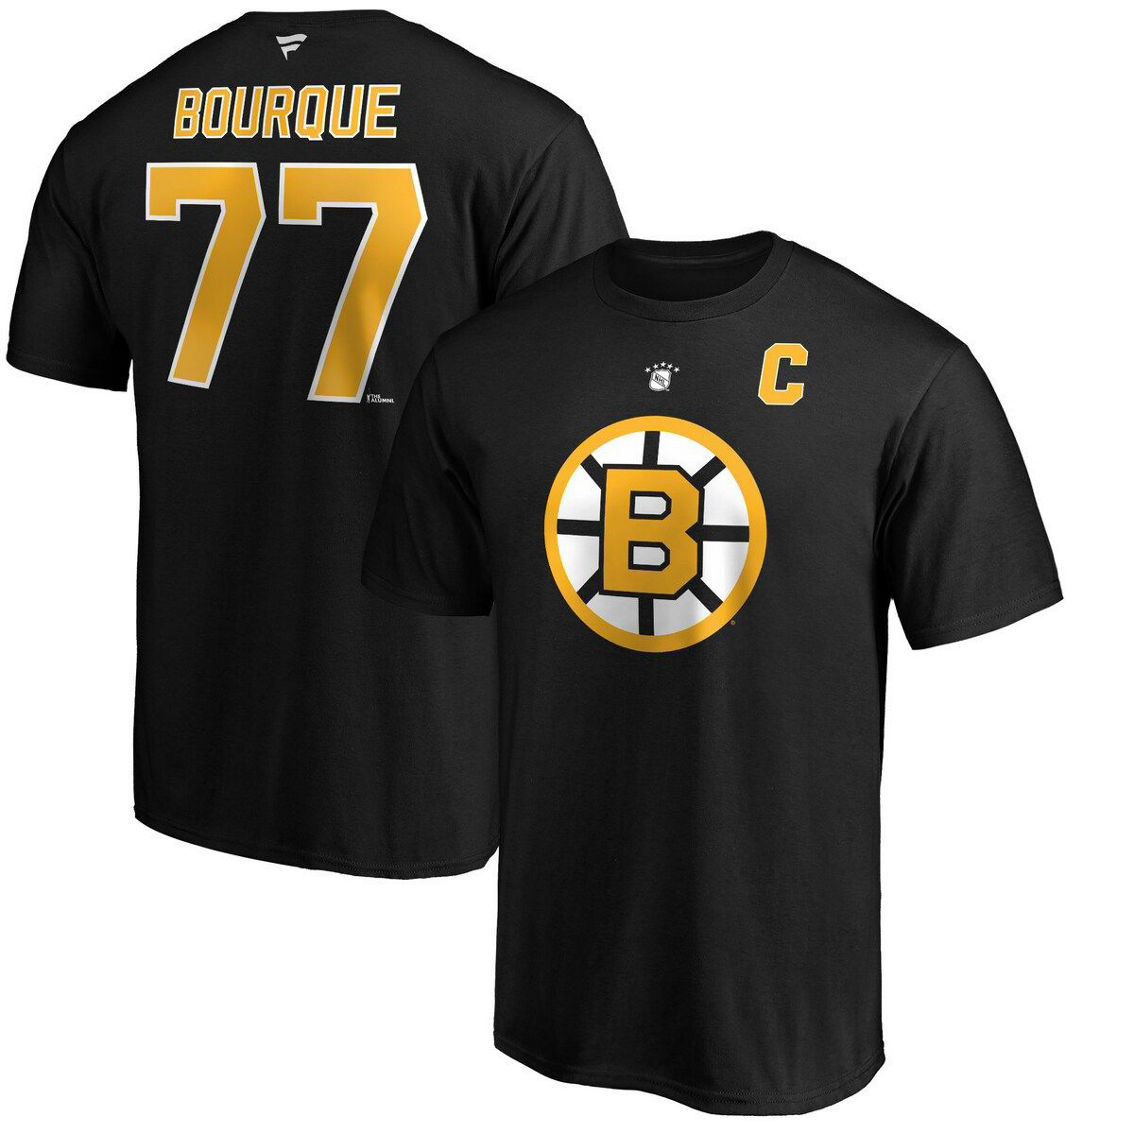 Fanatics Branded Men's Ray Bourque Black Boston Bruins Authentic Stack Retired Player Name & Number T-Shirt - Image 2 of 4